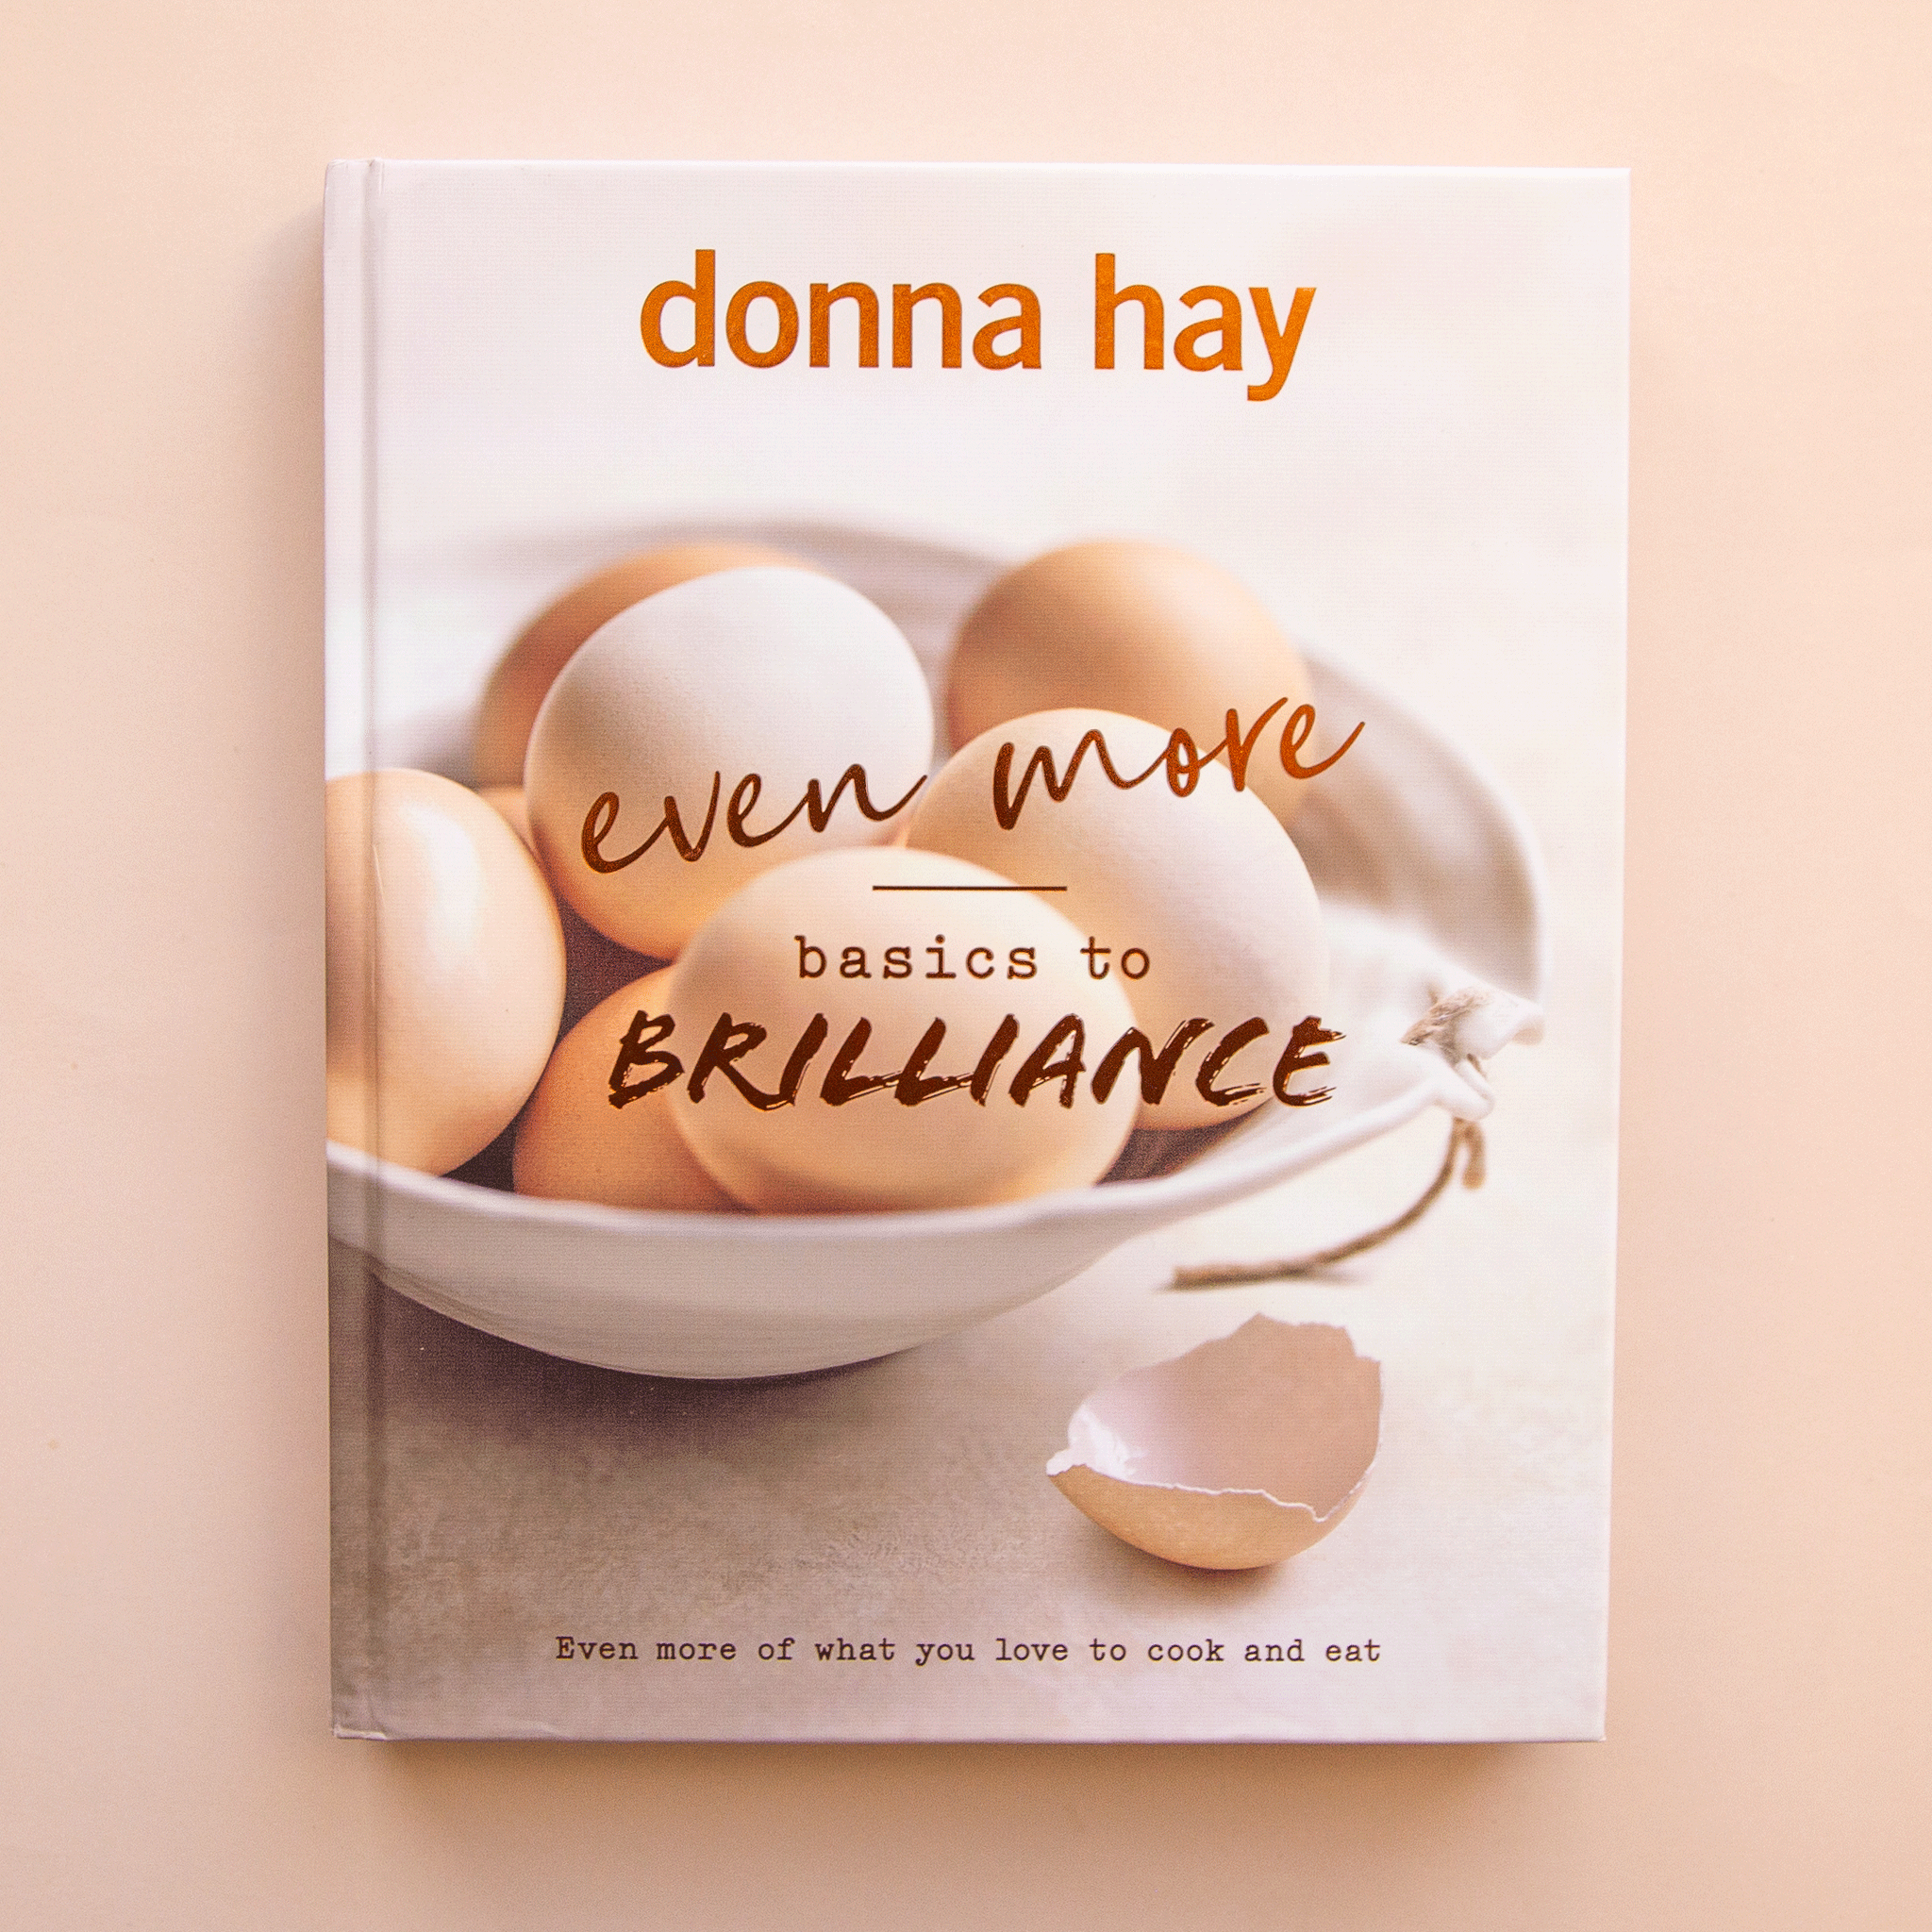 On a tan background is a neutral book cover with a photo of a bowl of eggs and the title that reads, "even more basics to Brilliance". 